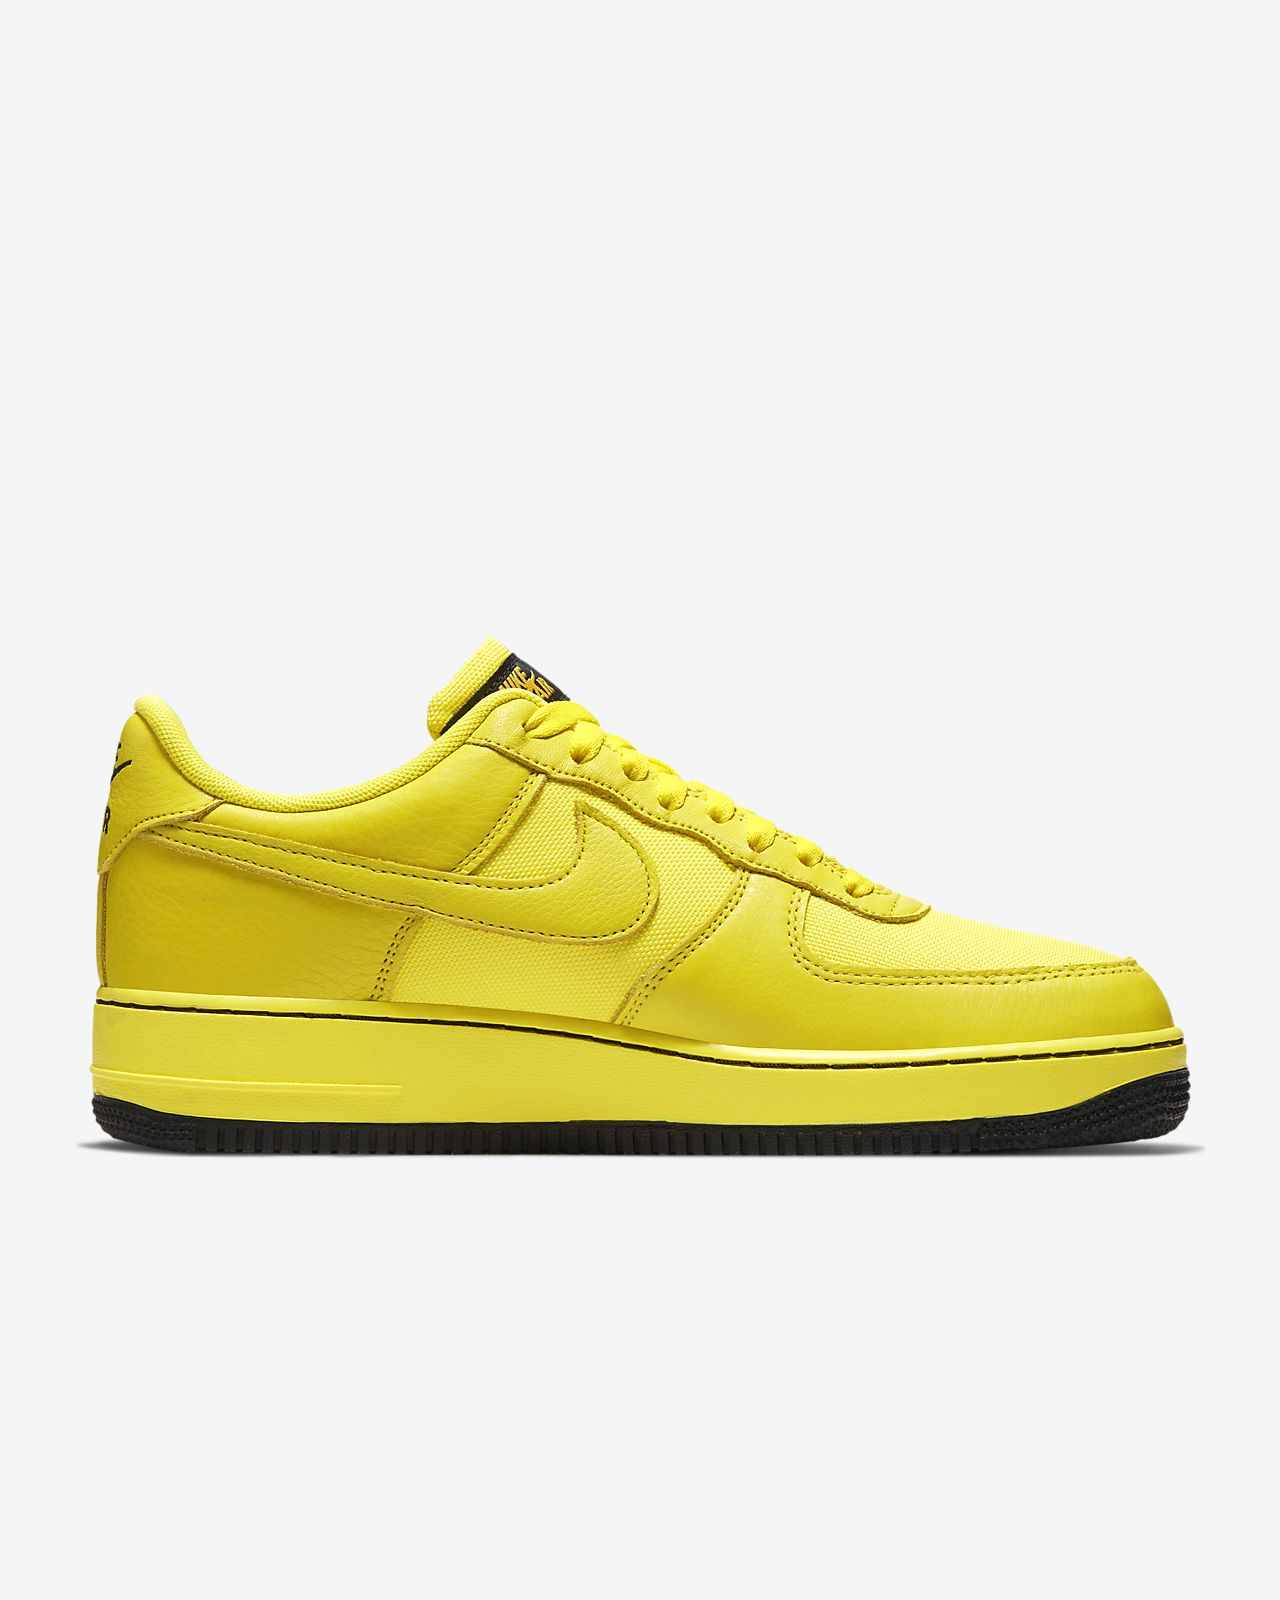 neon yellow shoes nike air force 1